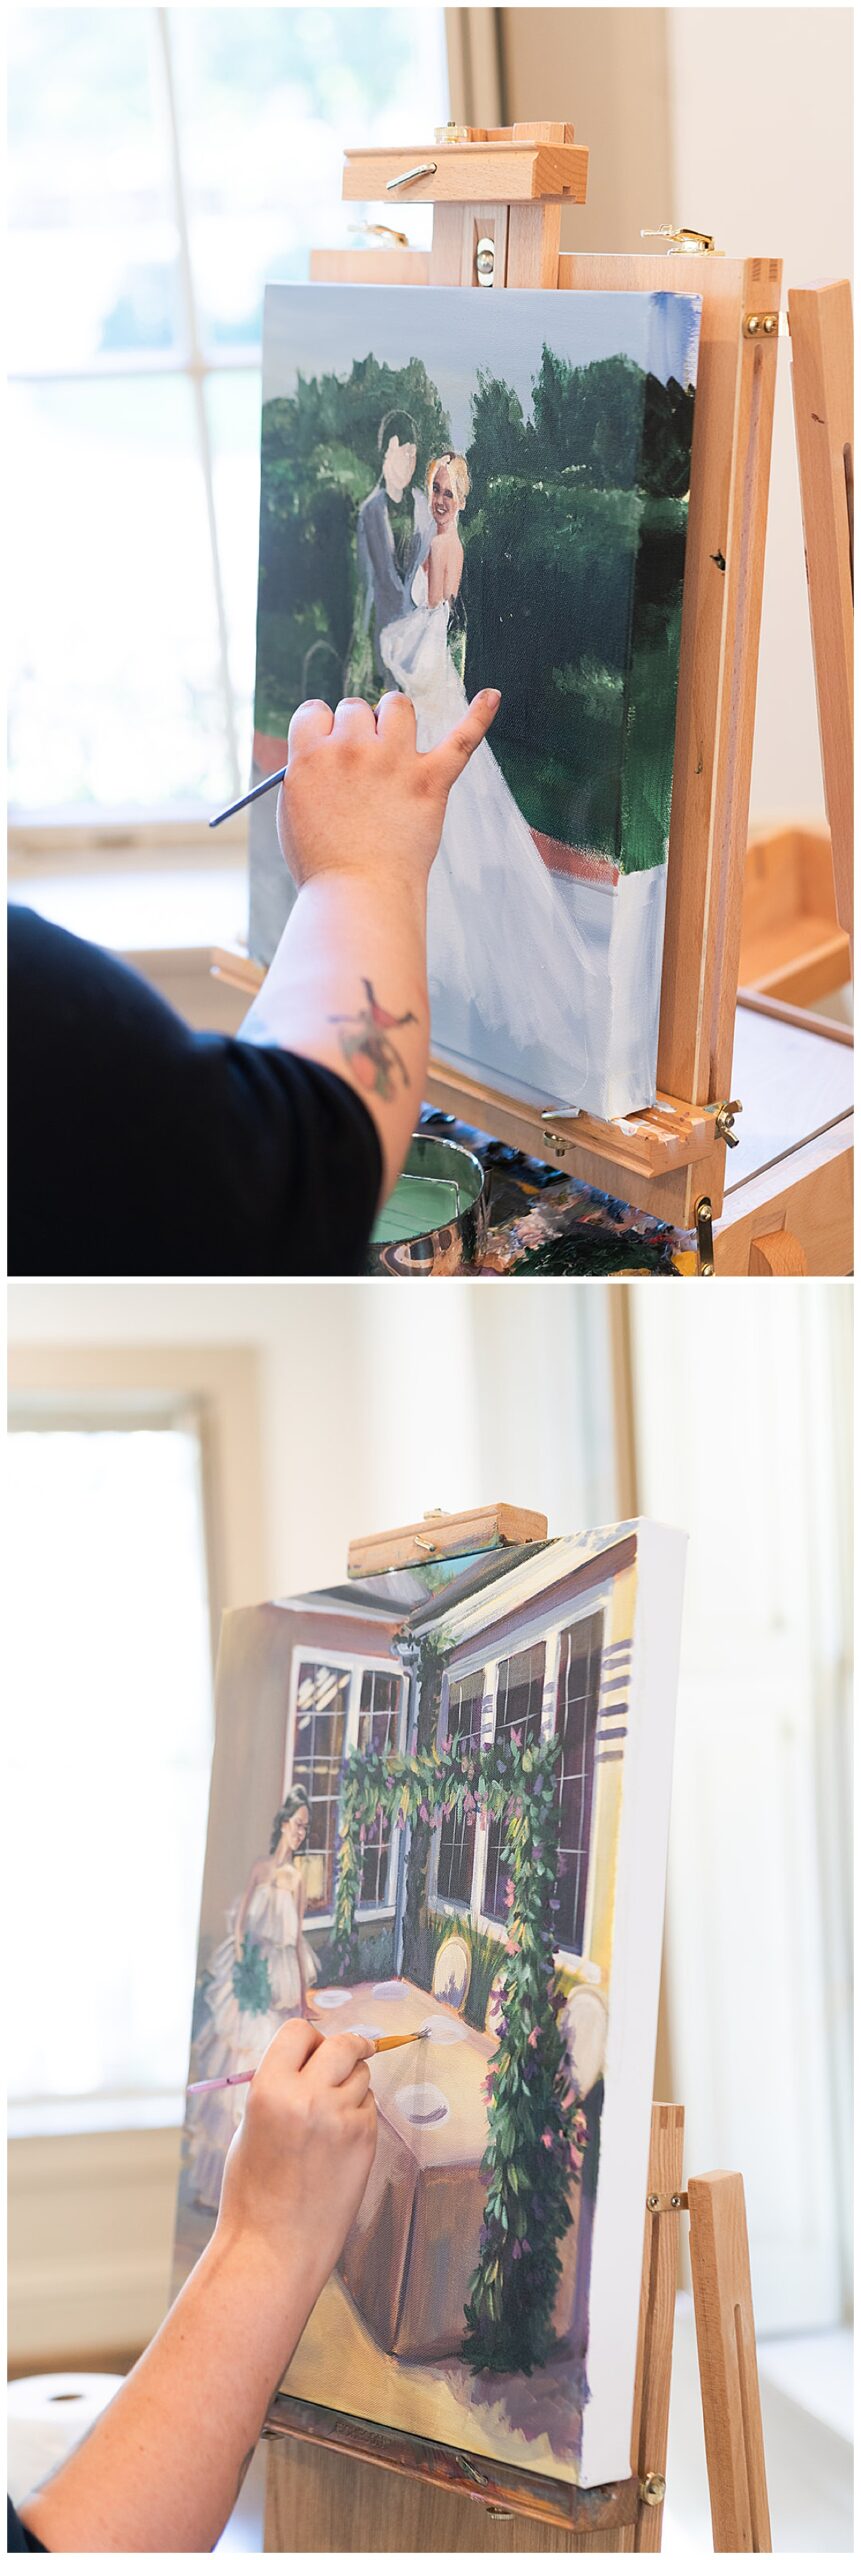 Live hand painting for Houston’s Best Wedding Photographers